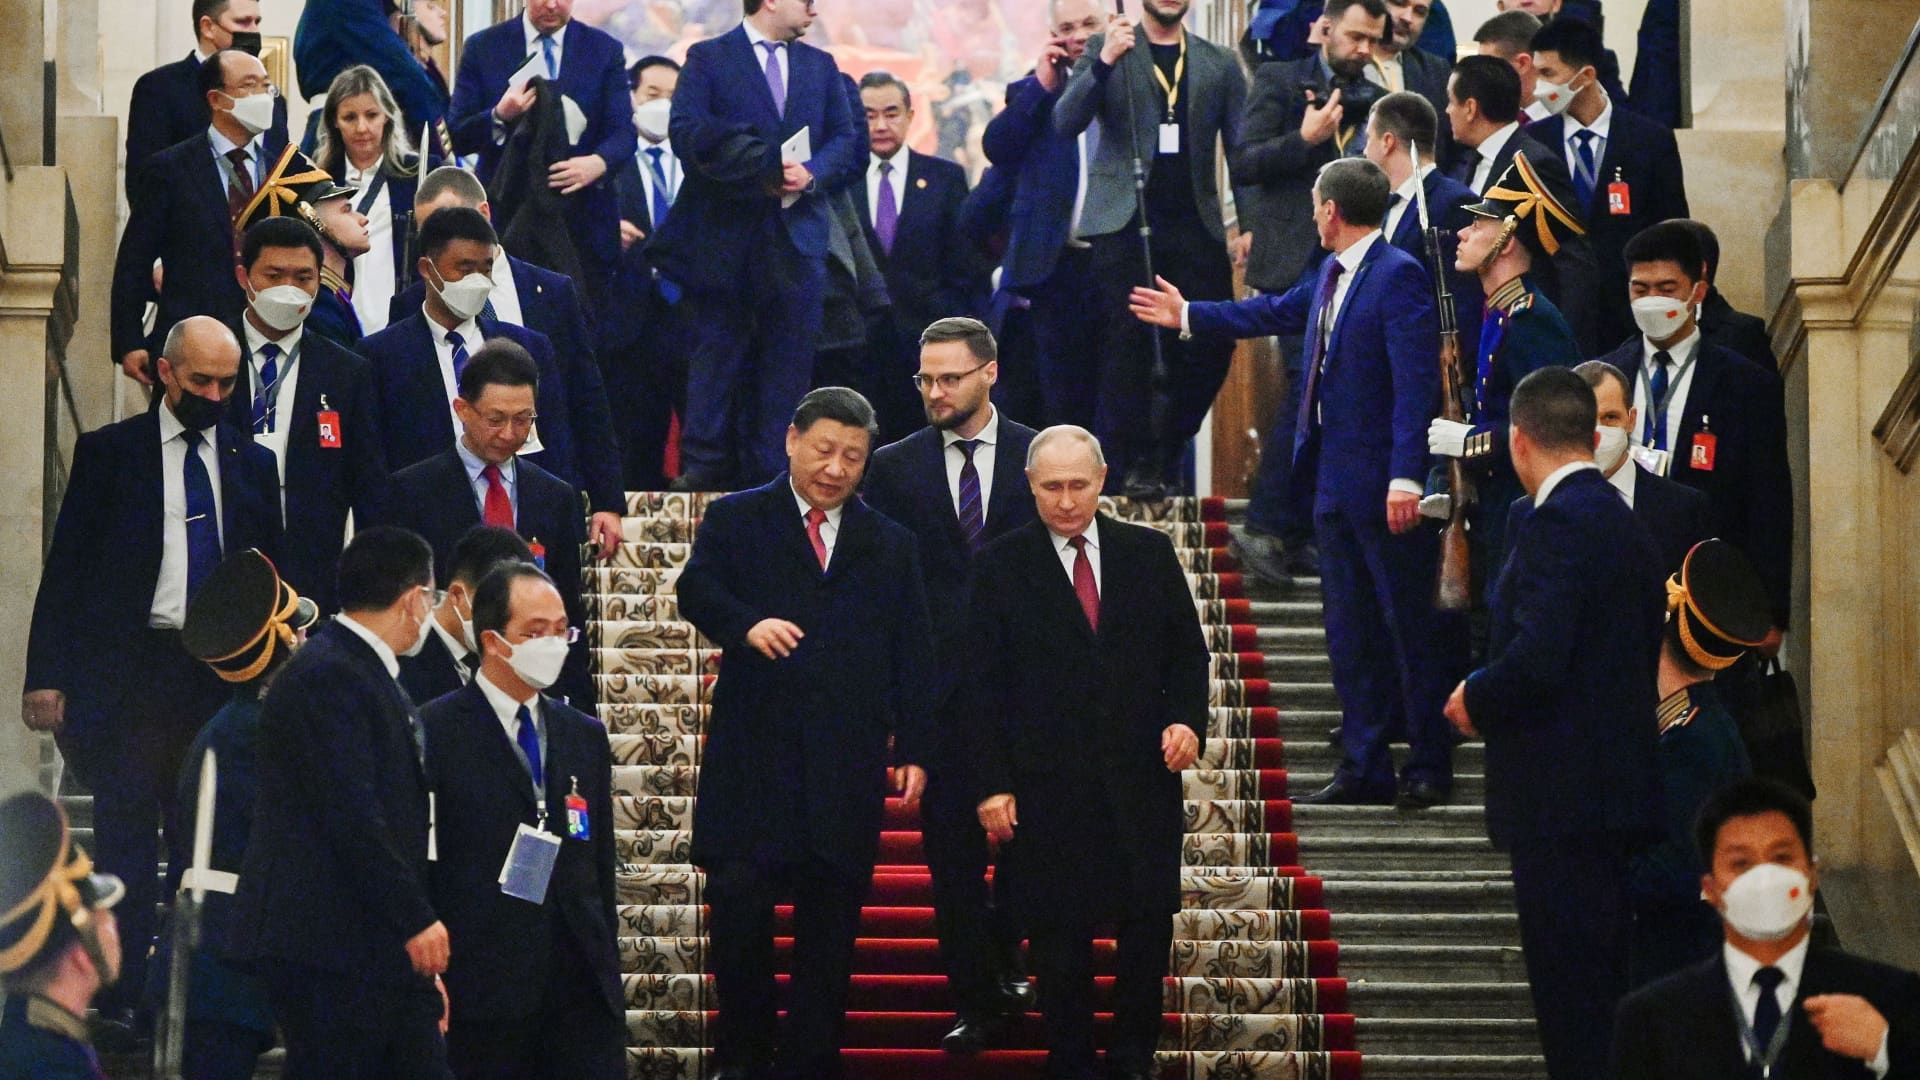 Russian President Vladimir Putin and China's President Xi Jinping leave after a reception following their talks at the Kremlin in Moscow on March 21, 2023.